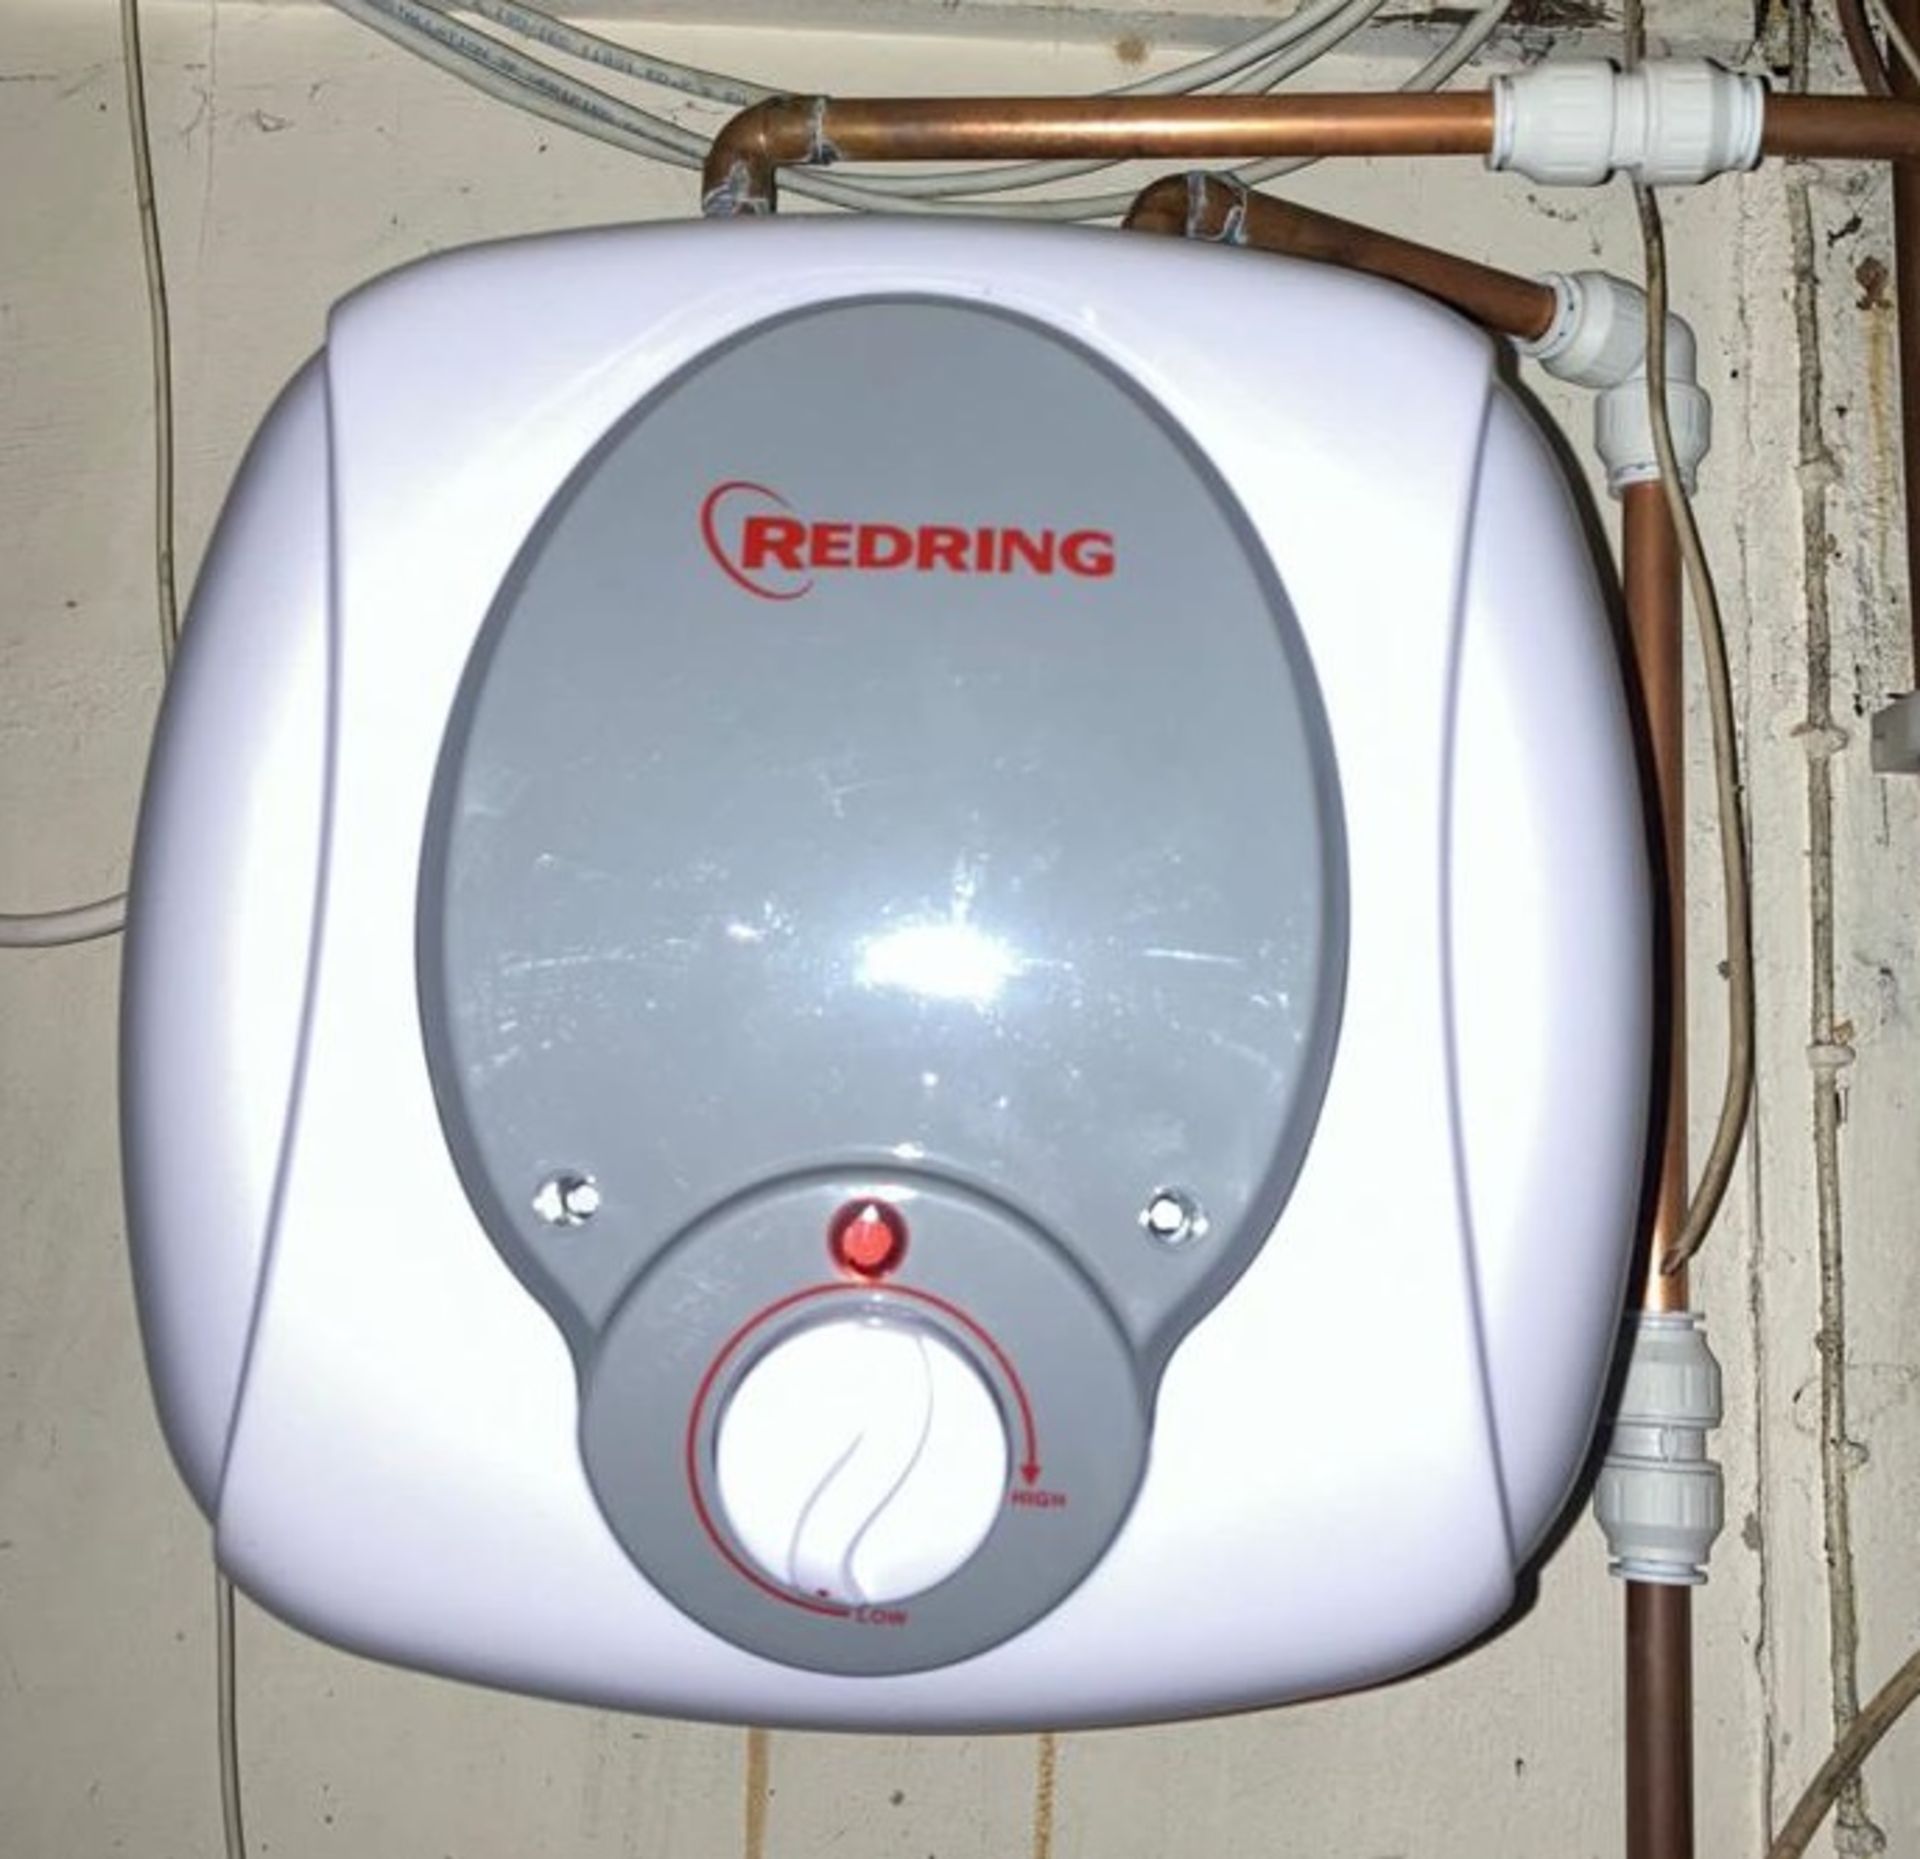 1 x Redring Stored Undersink 6L Water Heater 1.5kW  - To Be Removed From An Executive Office - Image 2 of 2